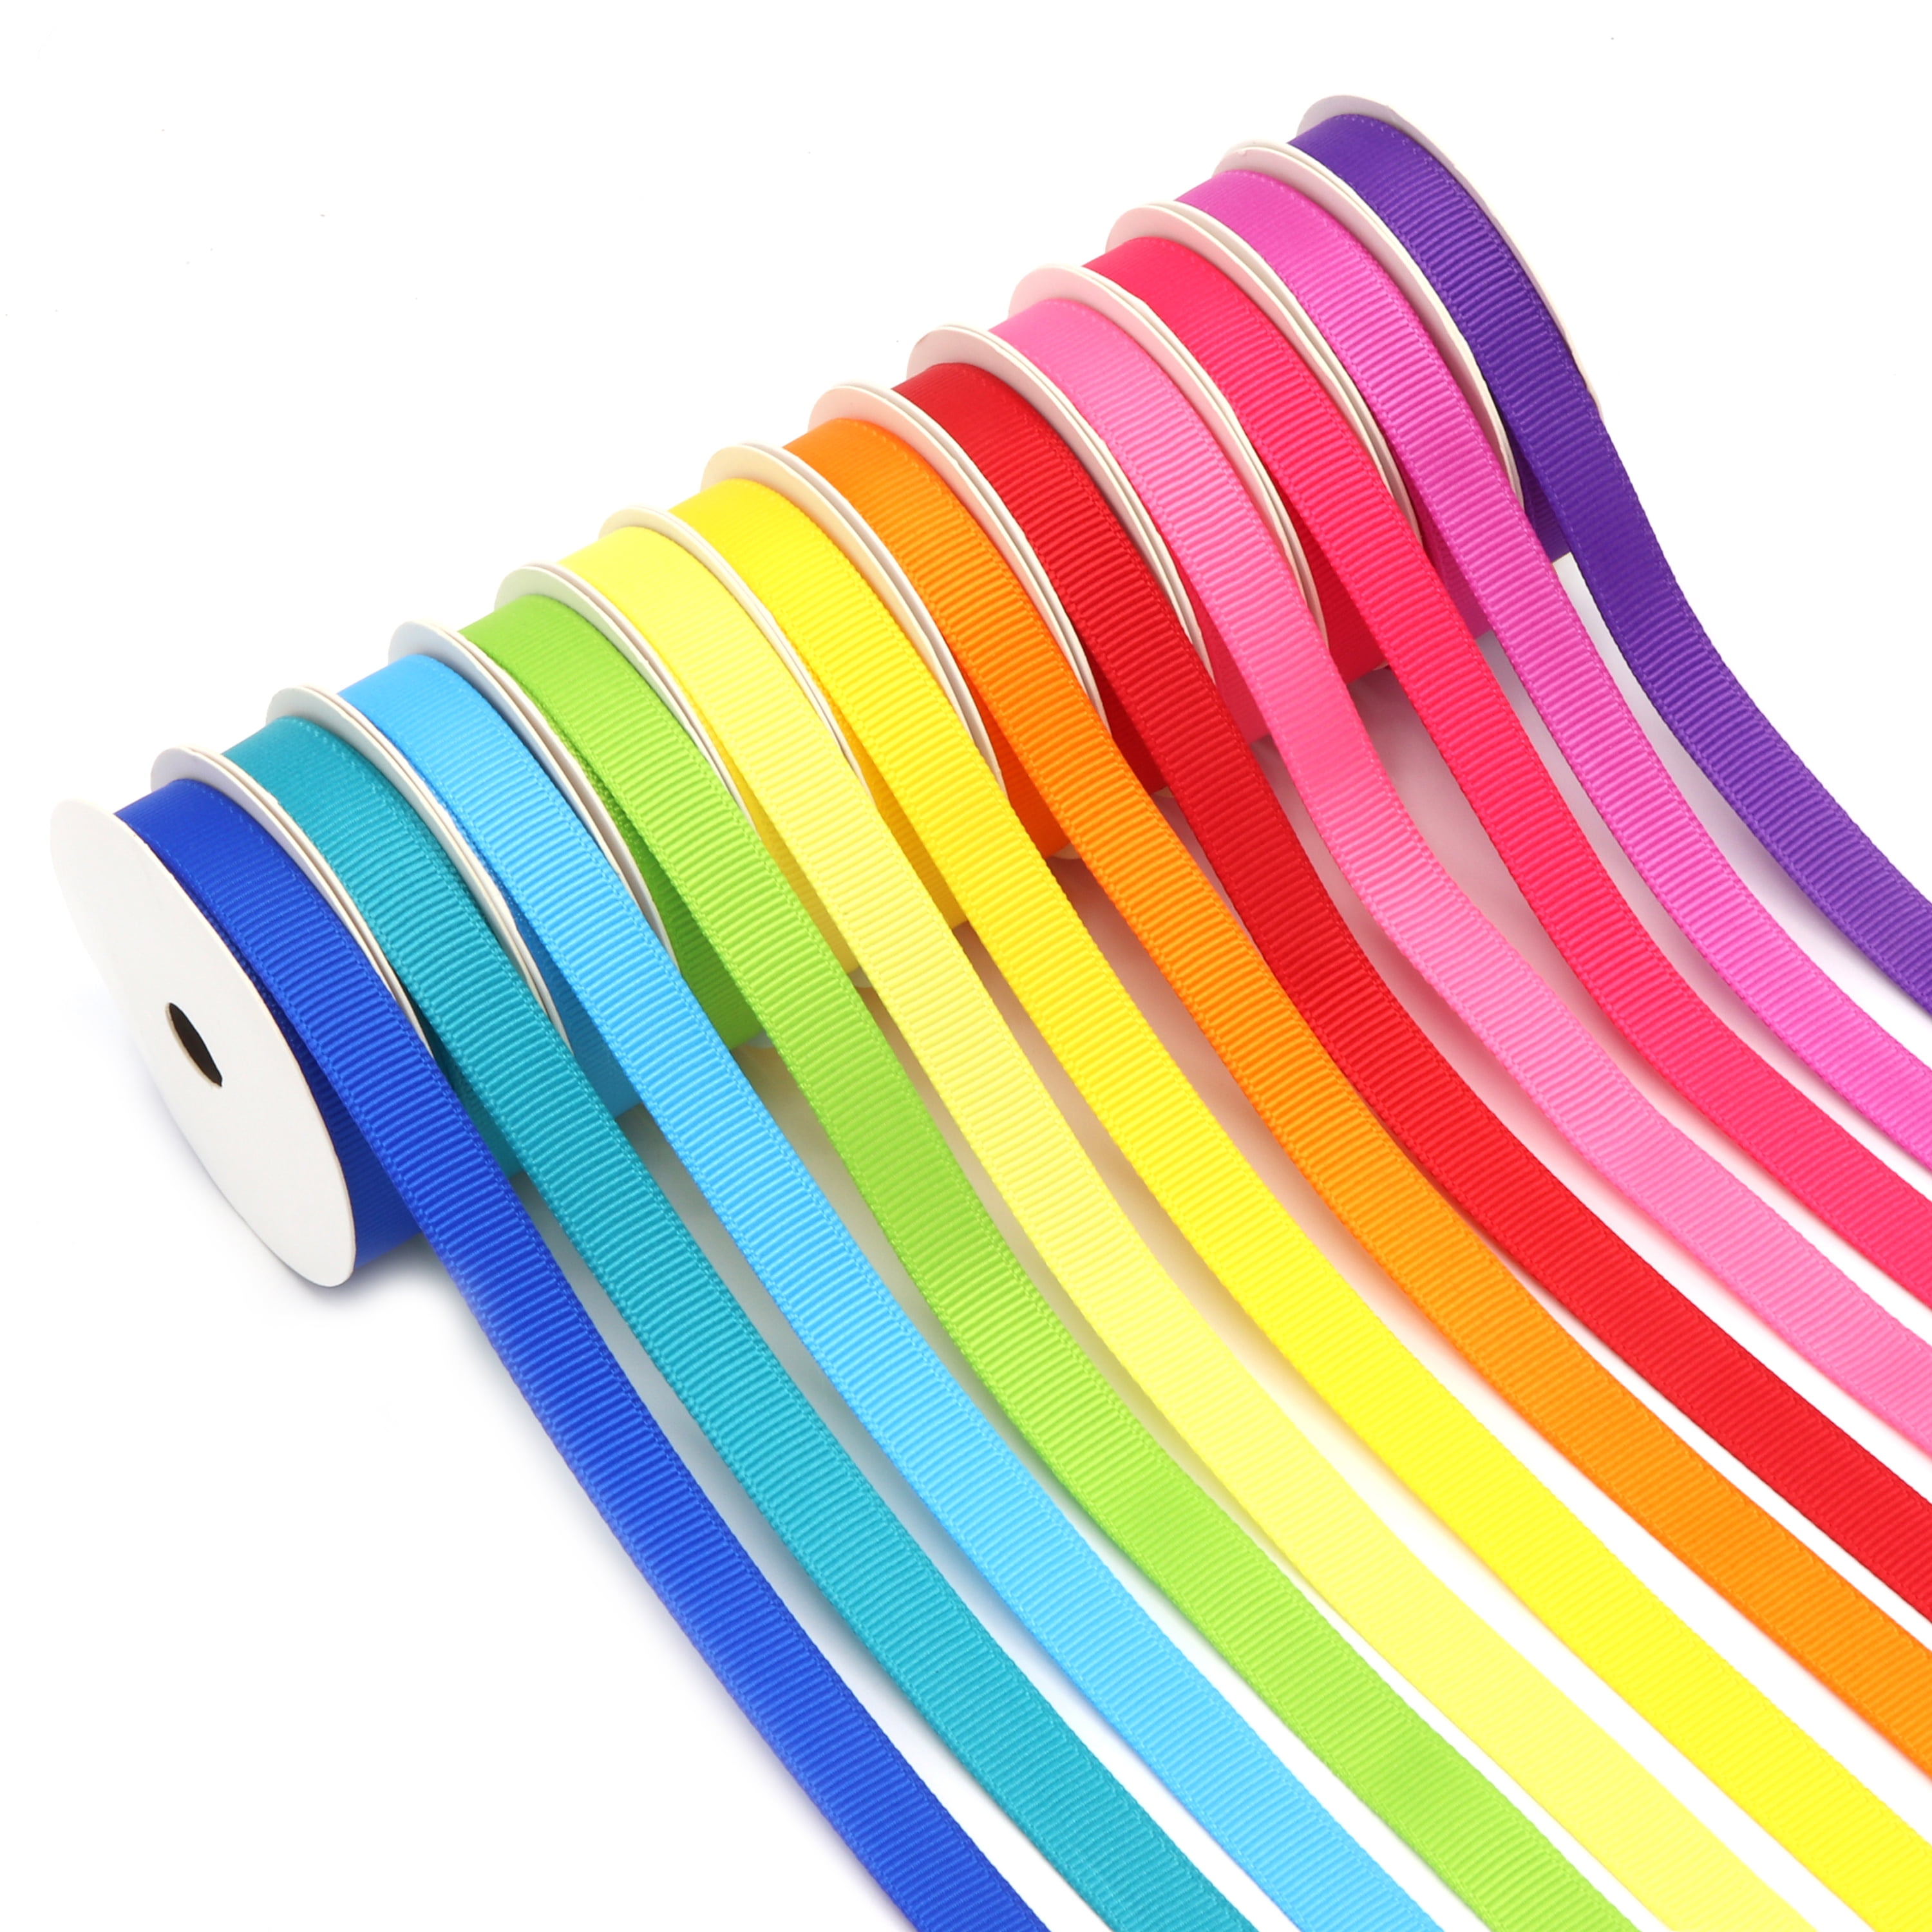 40 colors Solid Color Grosgrain Ribbon -50yards/Roll Premium Quality 6 sizes 